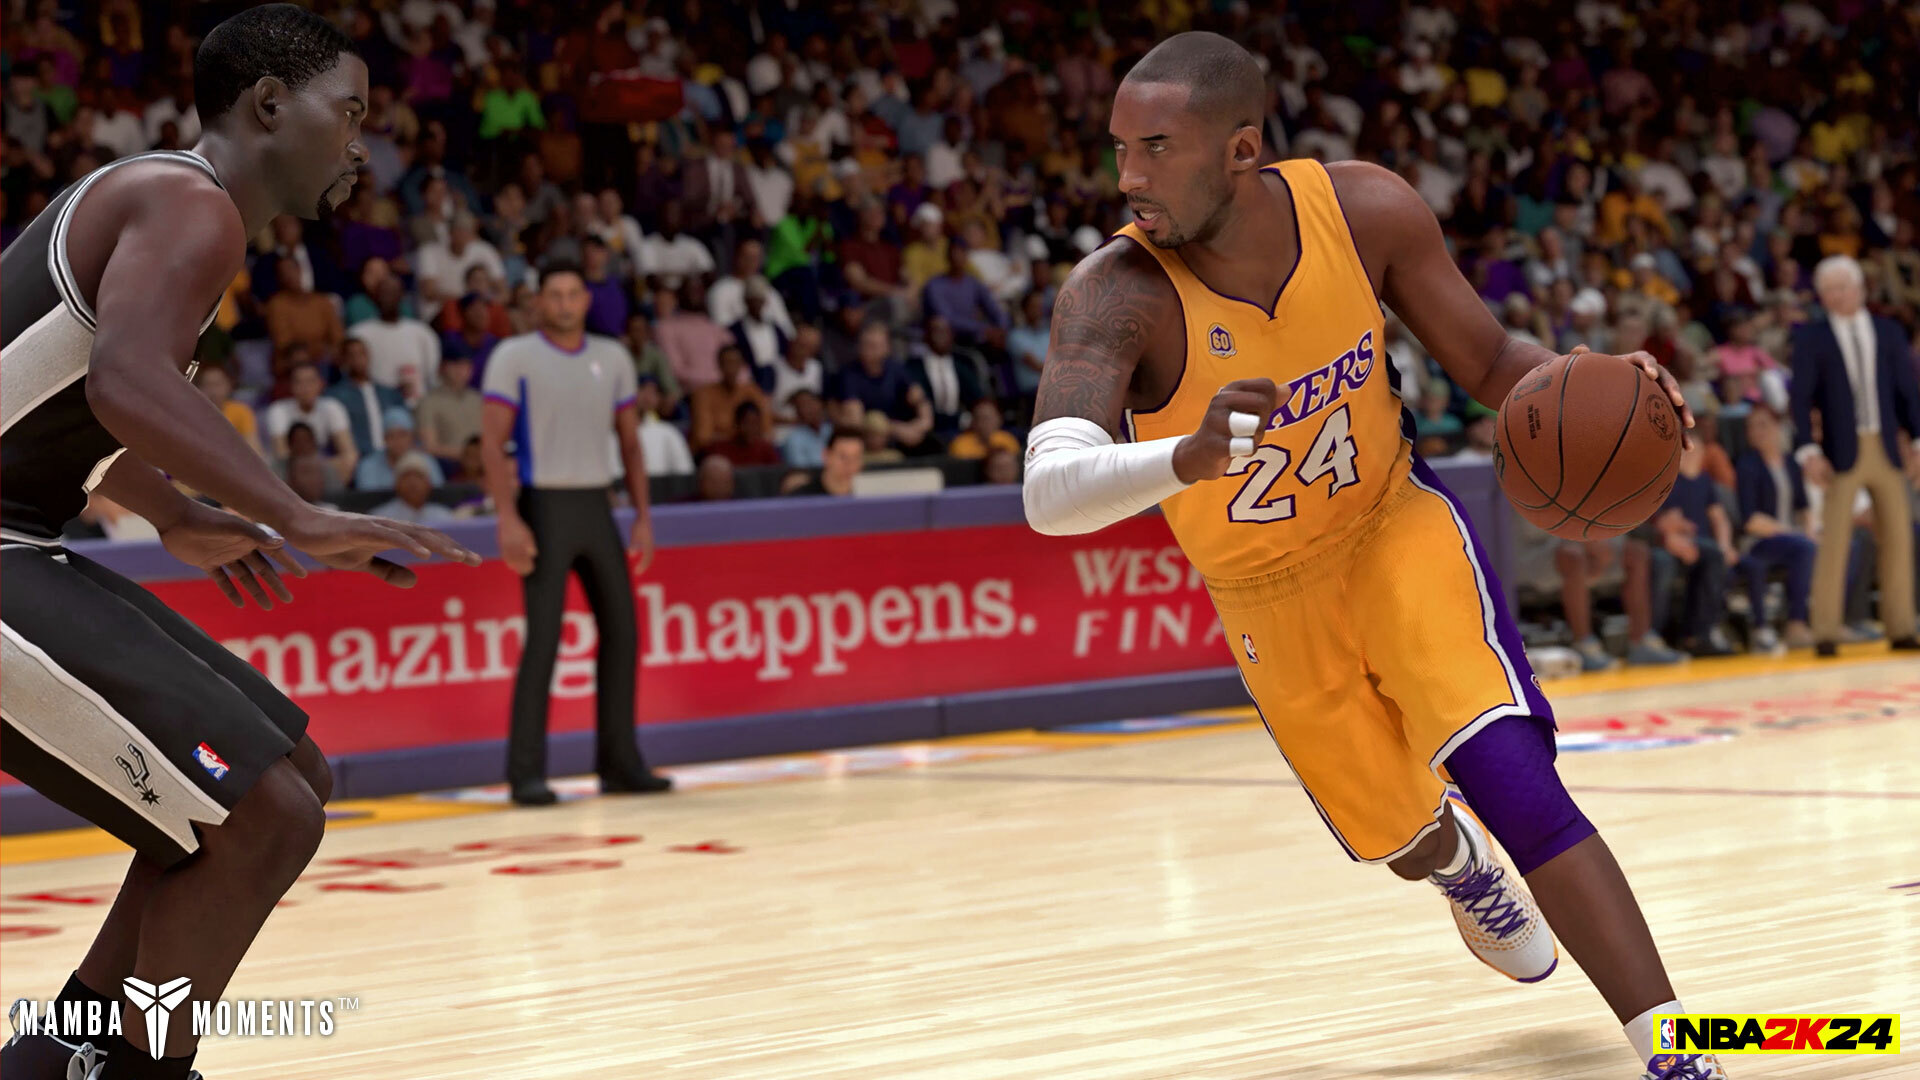 <div>HHW Gaming Review: ProPlay Technology & Kobe Bryant Can’t Deliver The W For ‘NBA 2K24’</div>